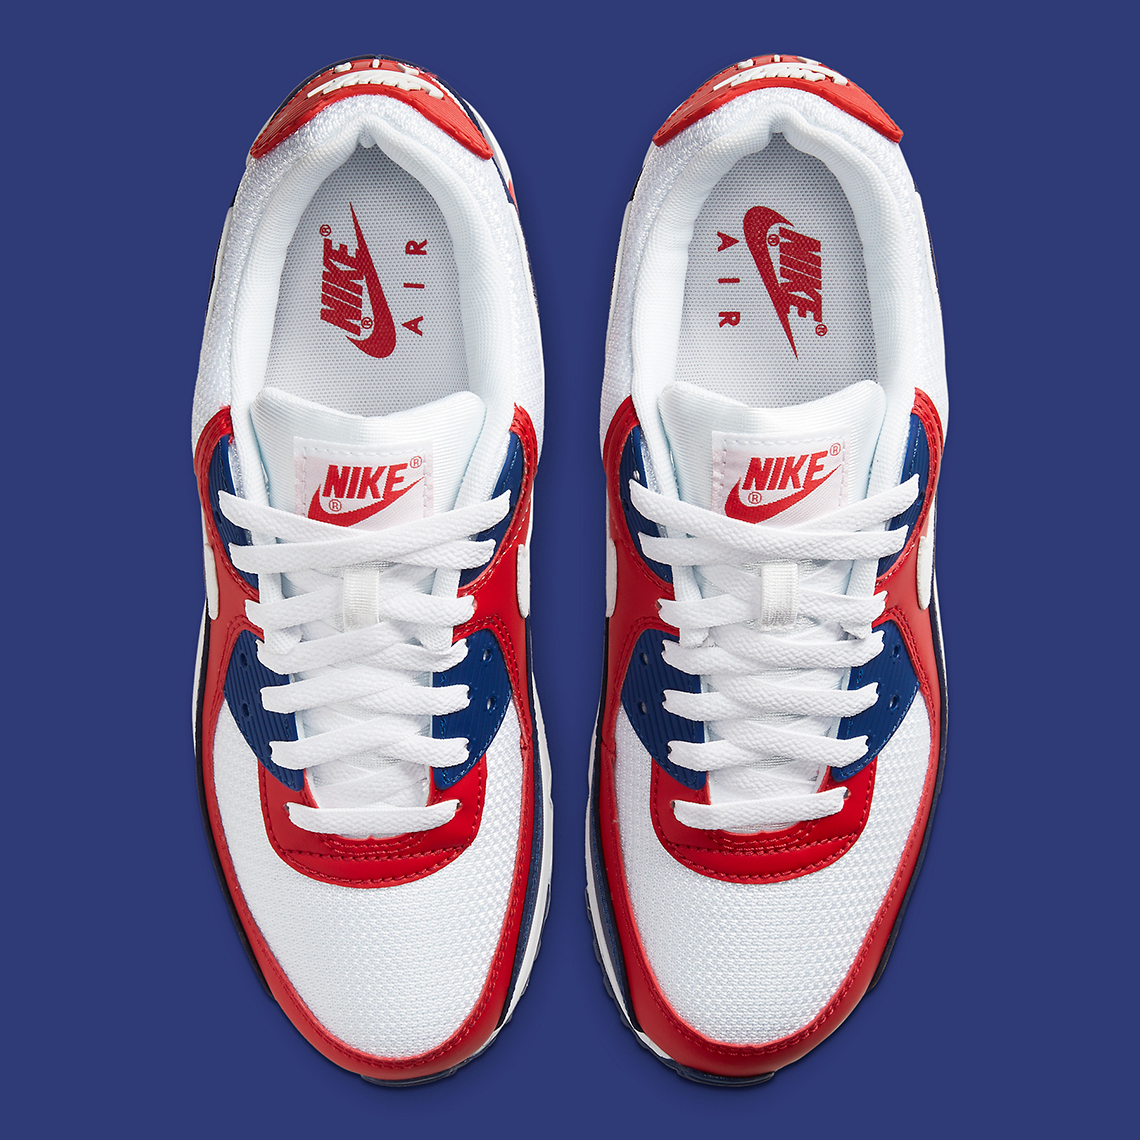 red and blue air max 90